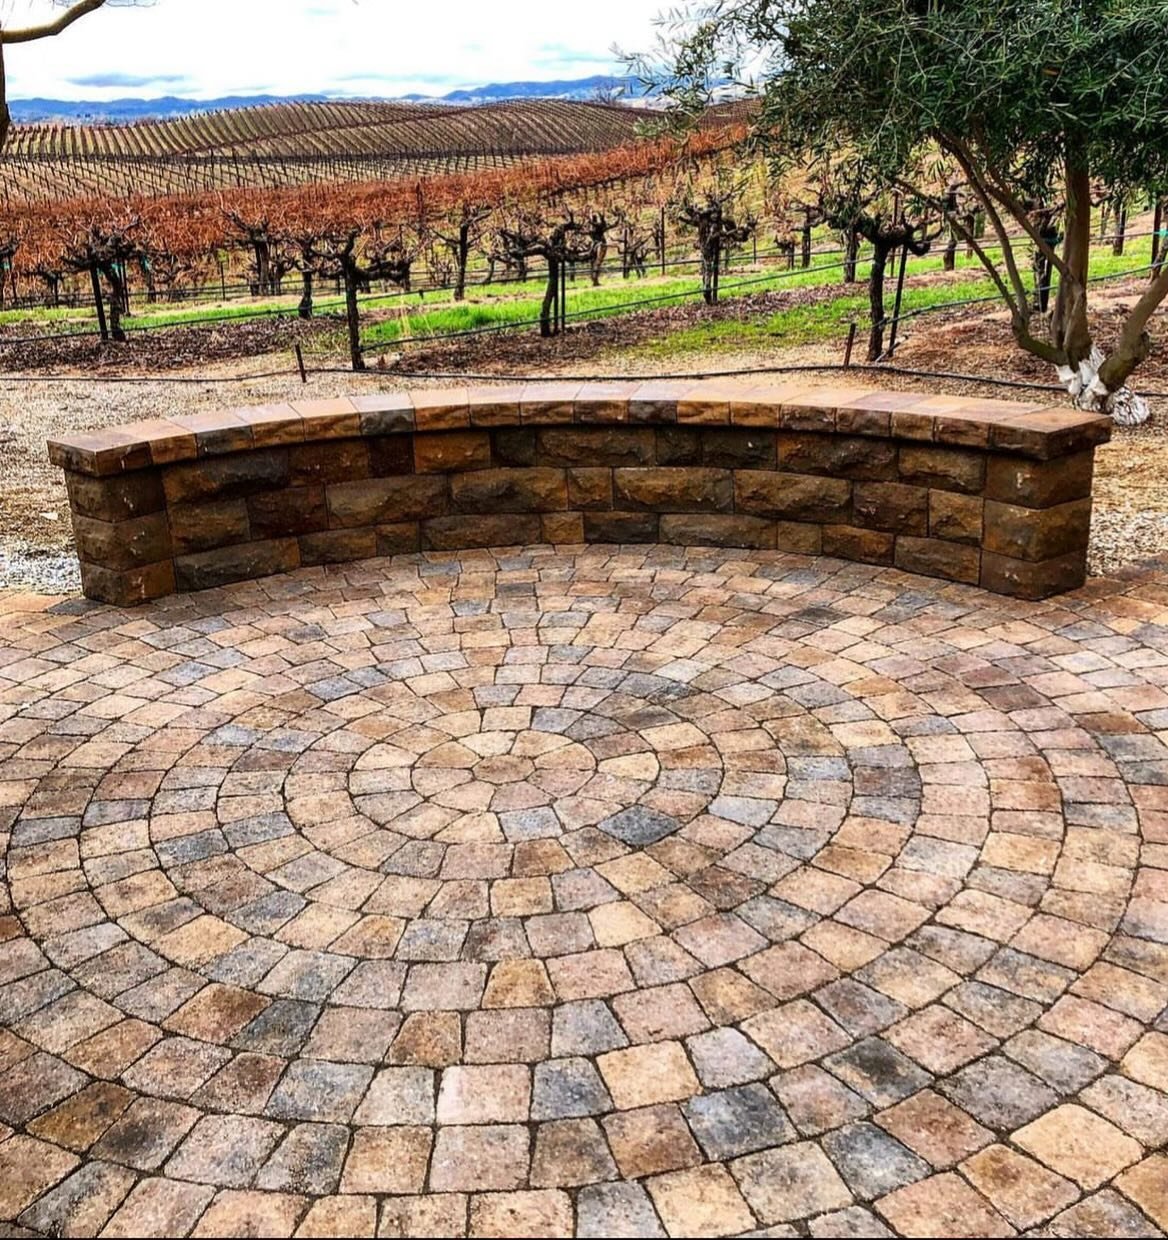 💭 Imagine yourself stepping onto this new patio, perched high above the sprawling vineyard. As you take a seat, you are greeted by a tranquil ambiance, surrounded by the lush greenery of the grapevines. The patio is thoughttully designed to offer un